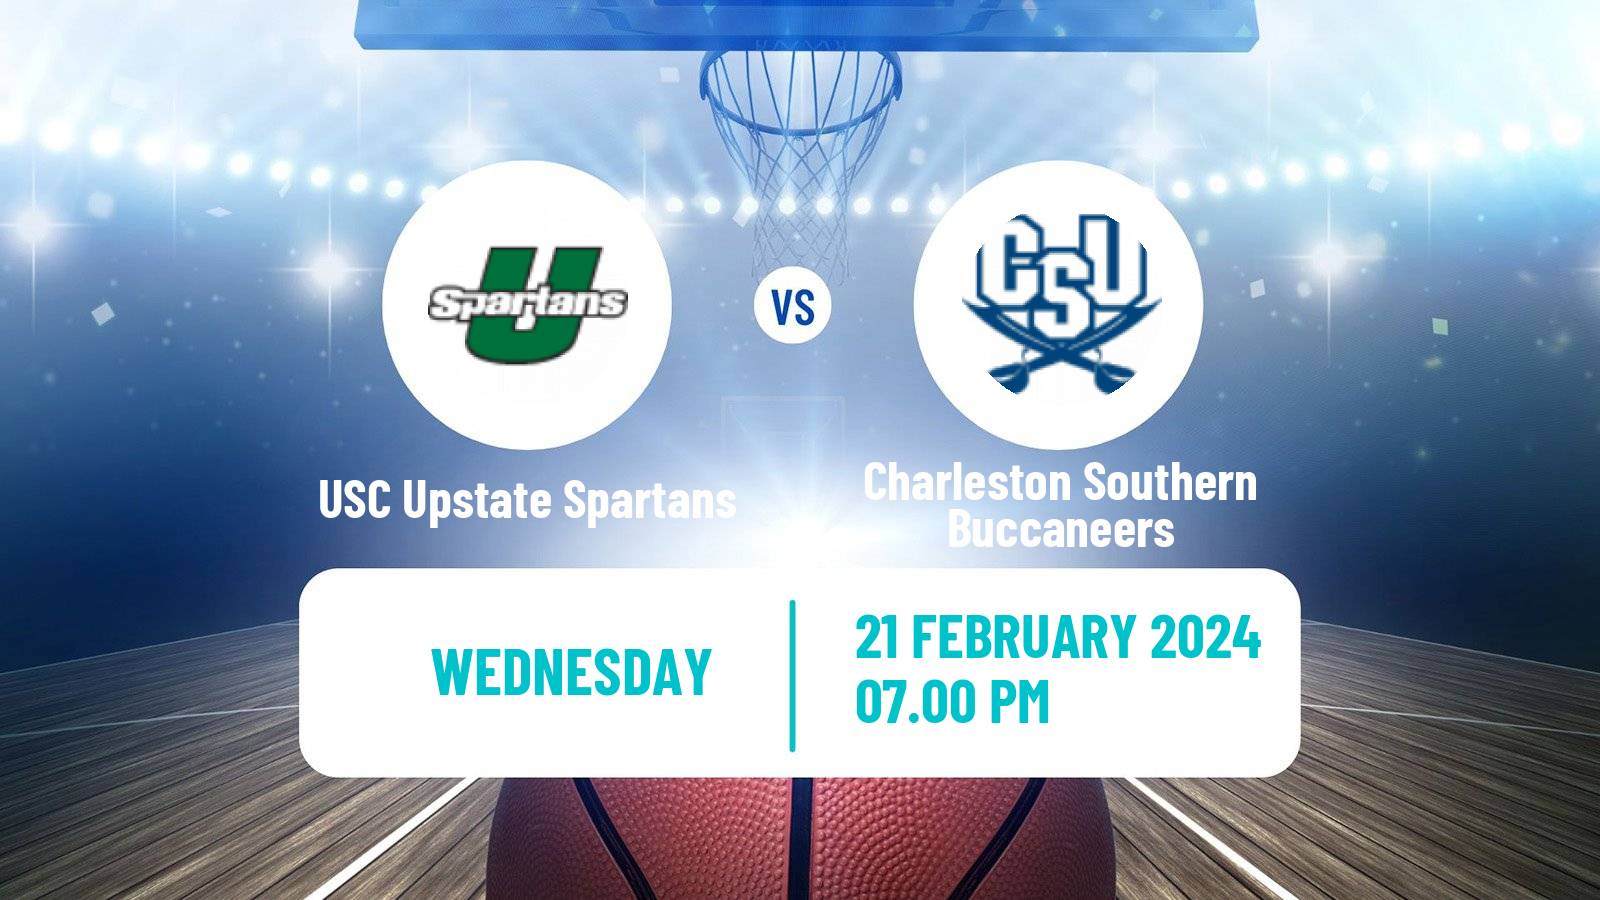 Basketball NCAA College Basketball USC Upstate Spartans - Charleston Southern Buccaneers